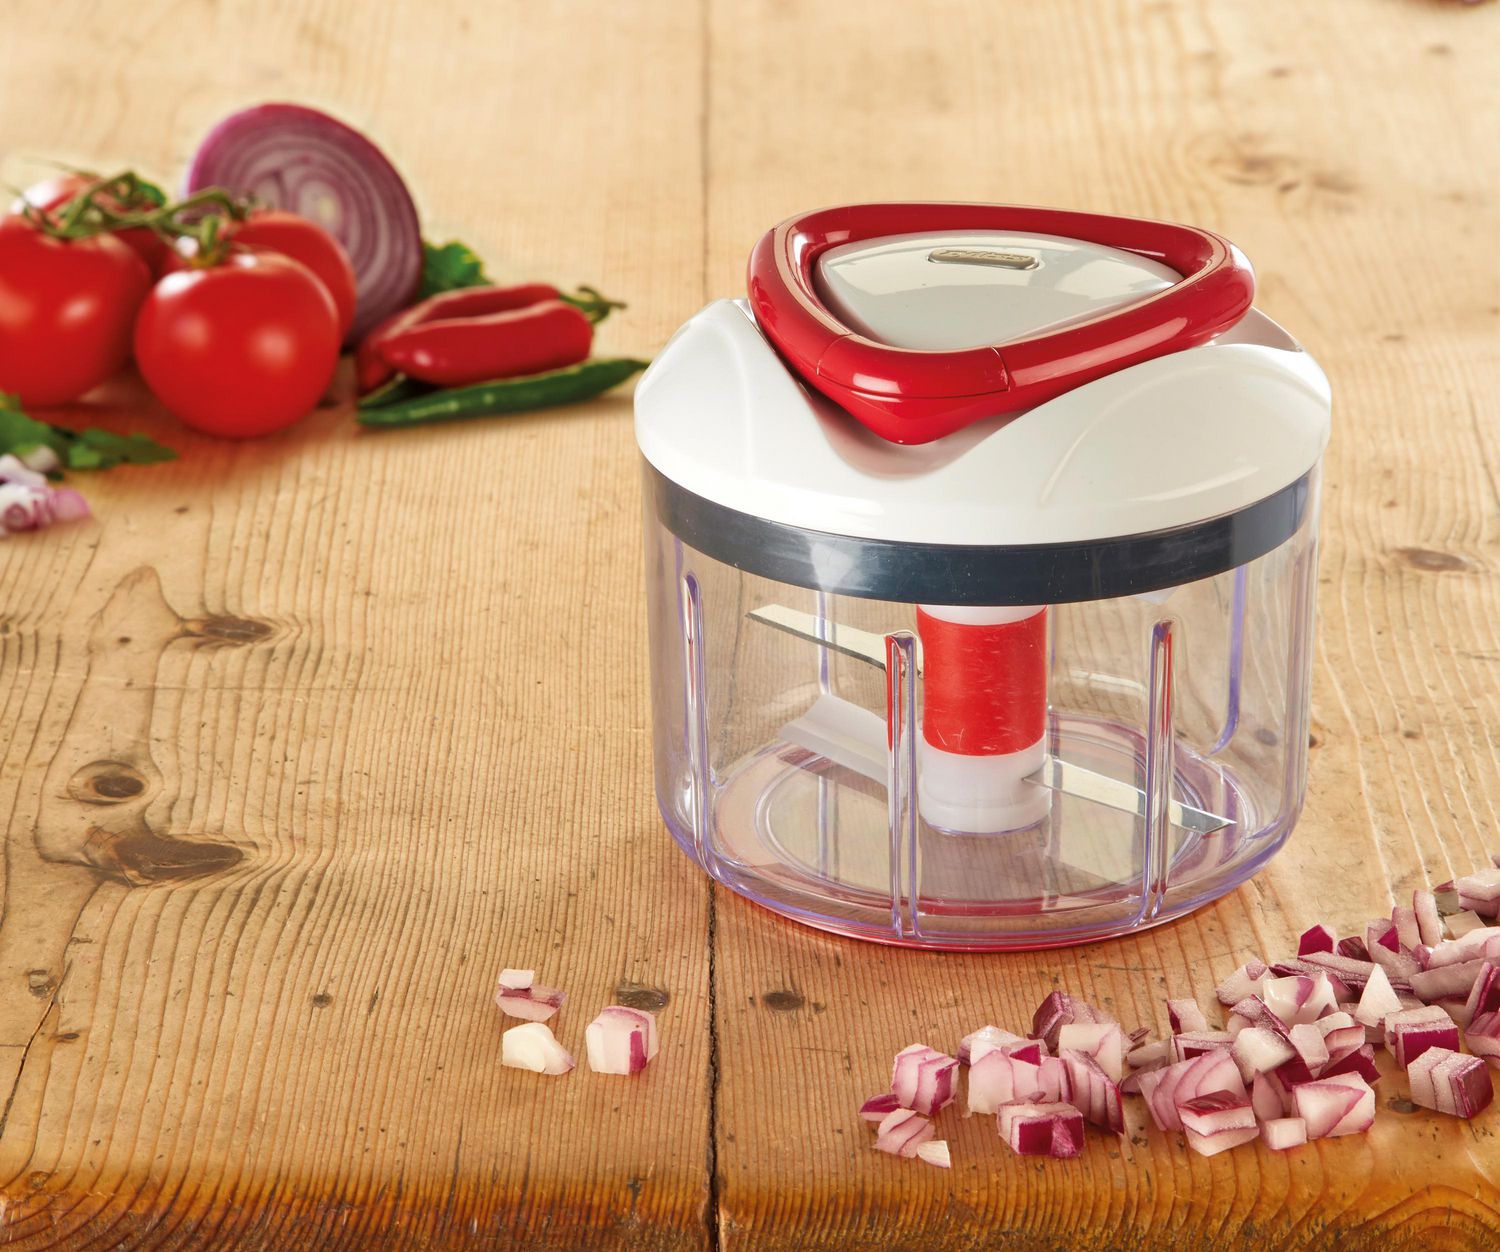 Zyliss E910015U ZYLISS Easy Pull Food Chopper and Manual Food Processor -  Vegetable Slicer and Dicer - Hand Held